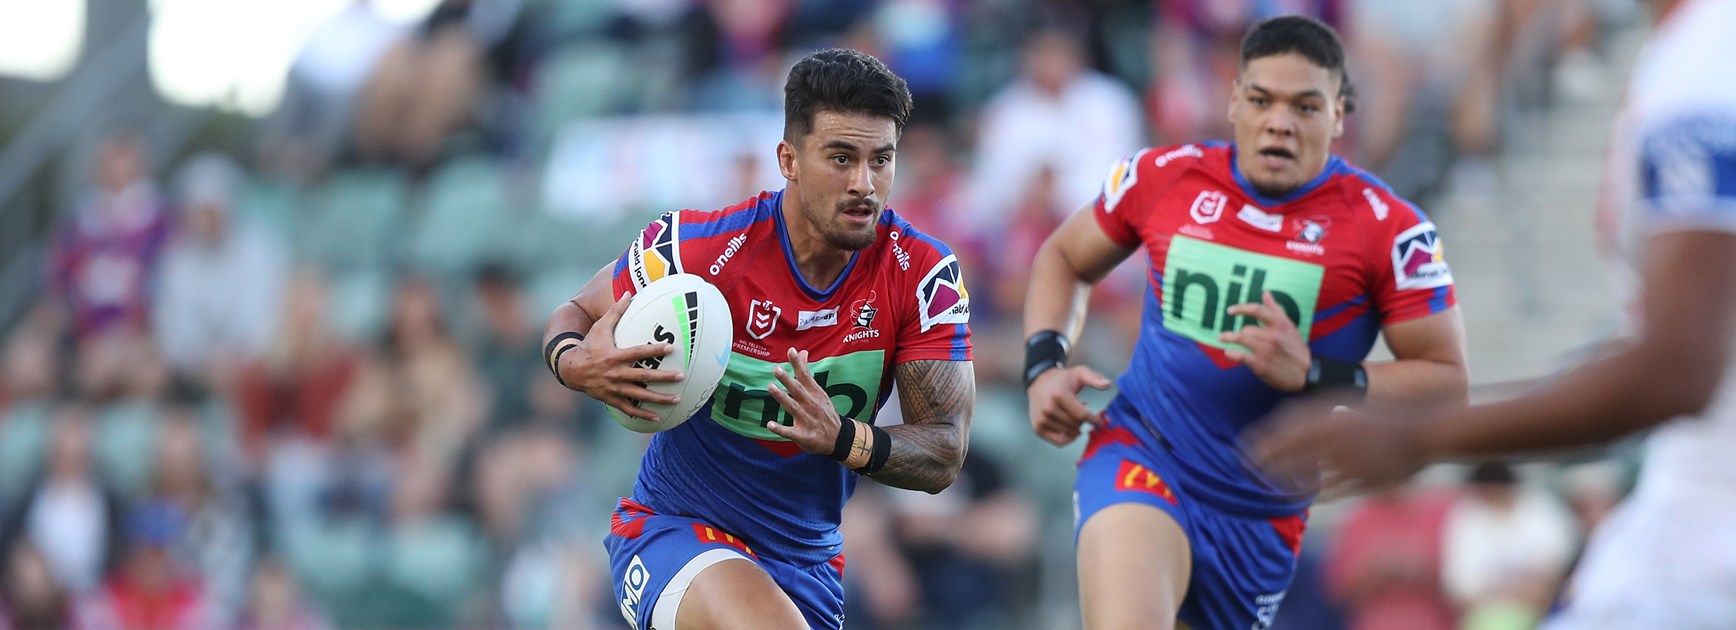 Knights downed by Dragons in Easter Sunday thriller